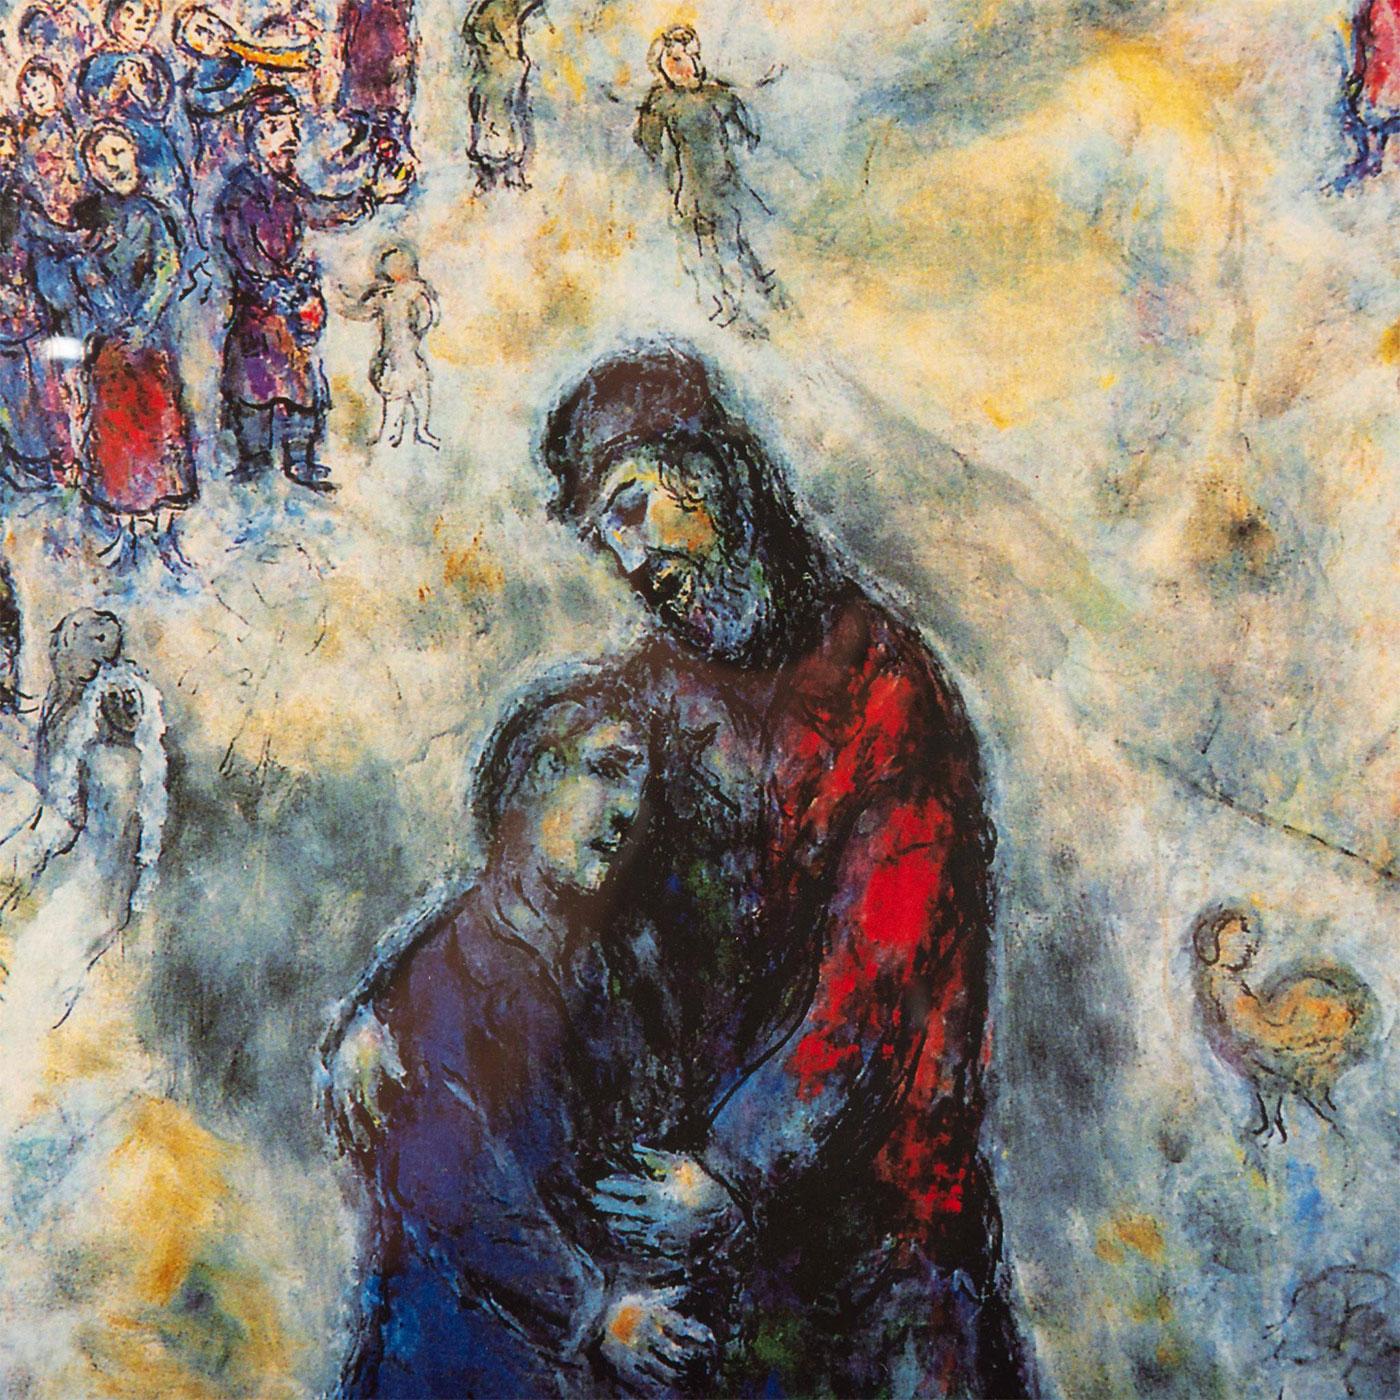 Marc Chagall's Return of the Prodigal